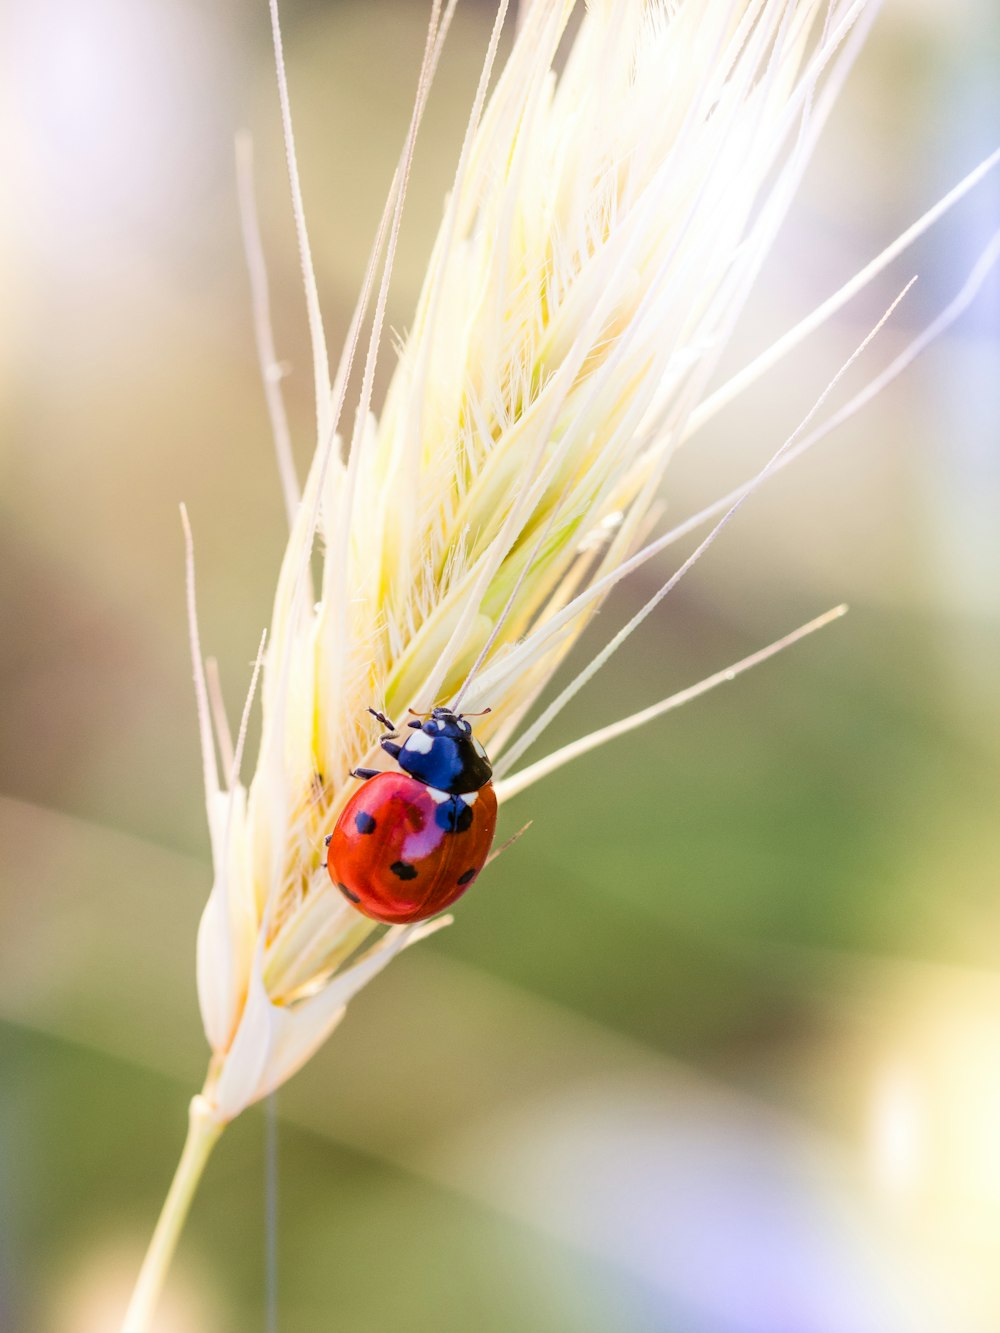 red ladybug perched on brown wheat in close up photography during daytime